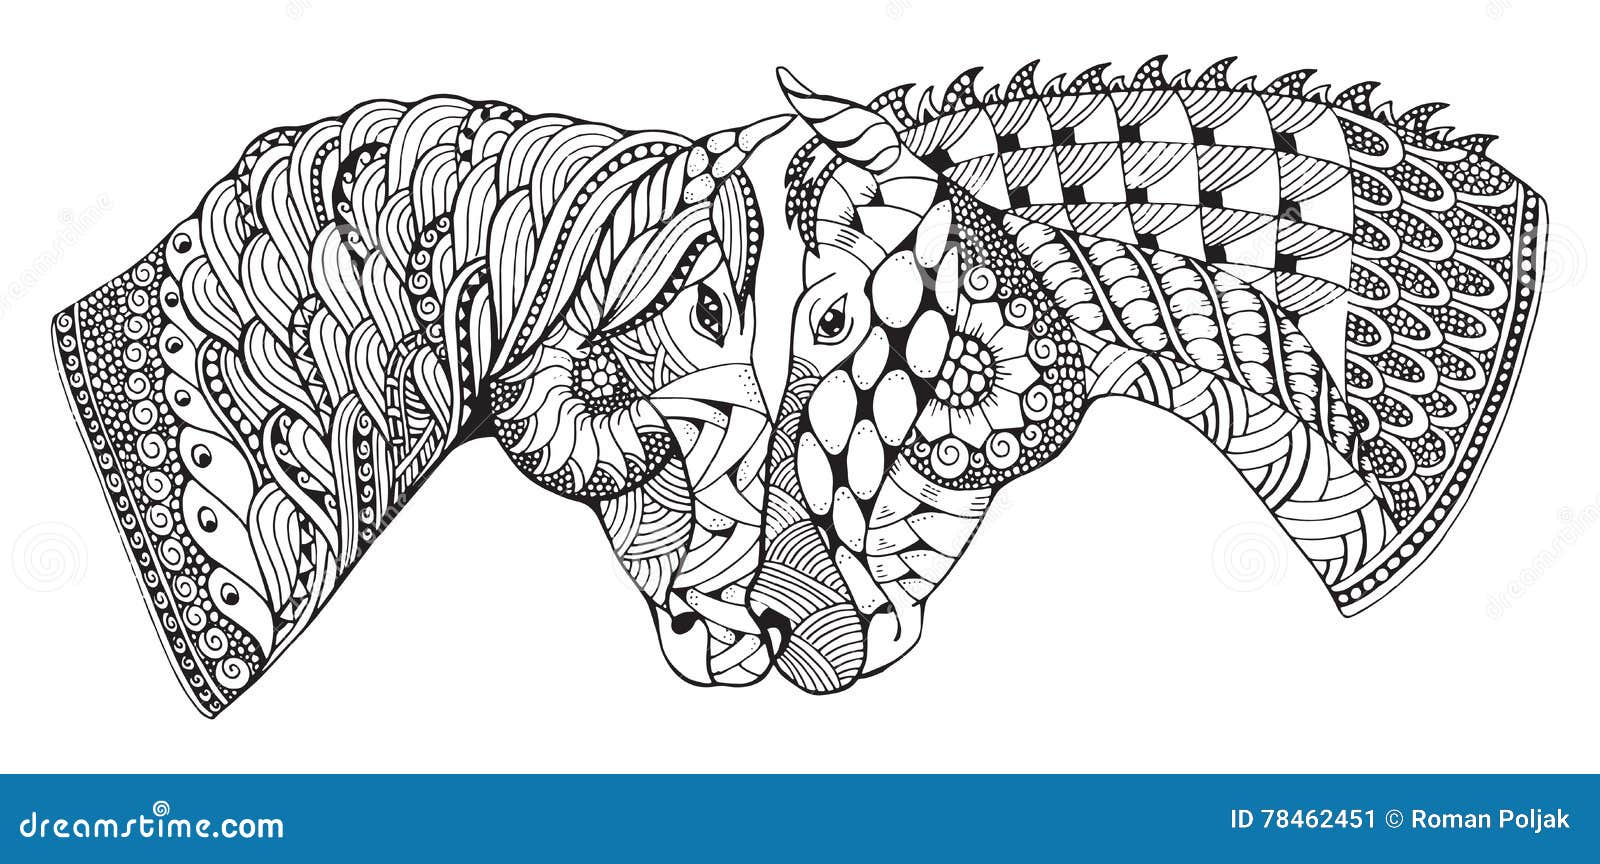 two horses showing affection, zentangle stylized, 